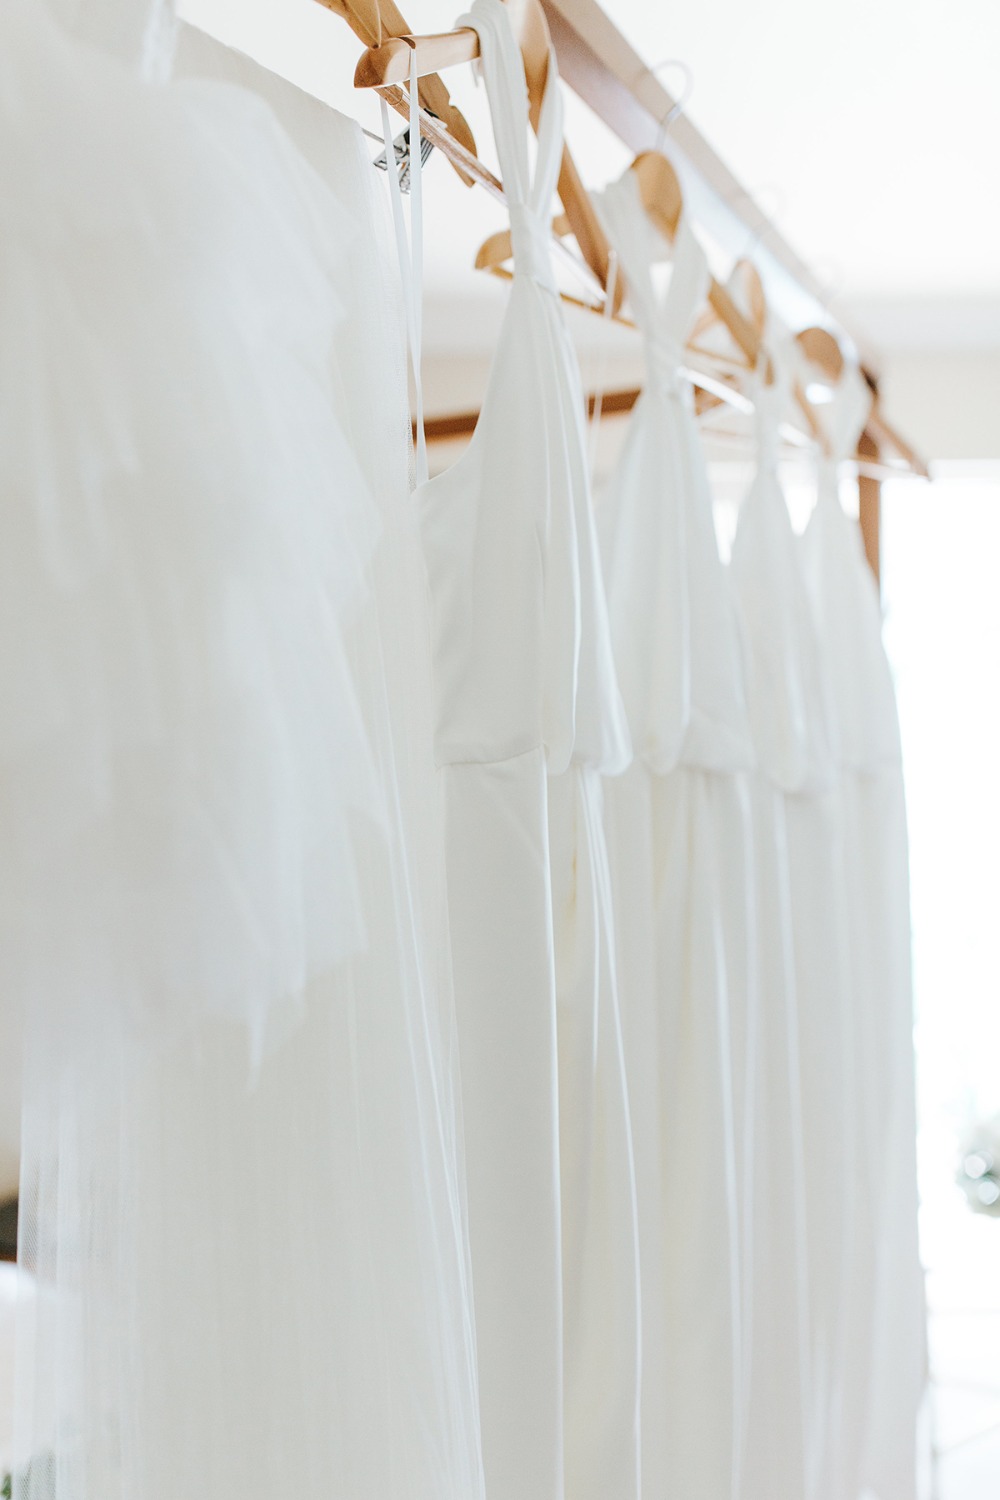 how-to-have-an-all-white-wedding-on